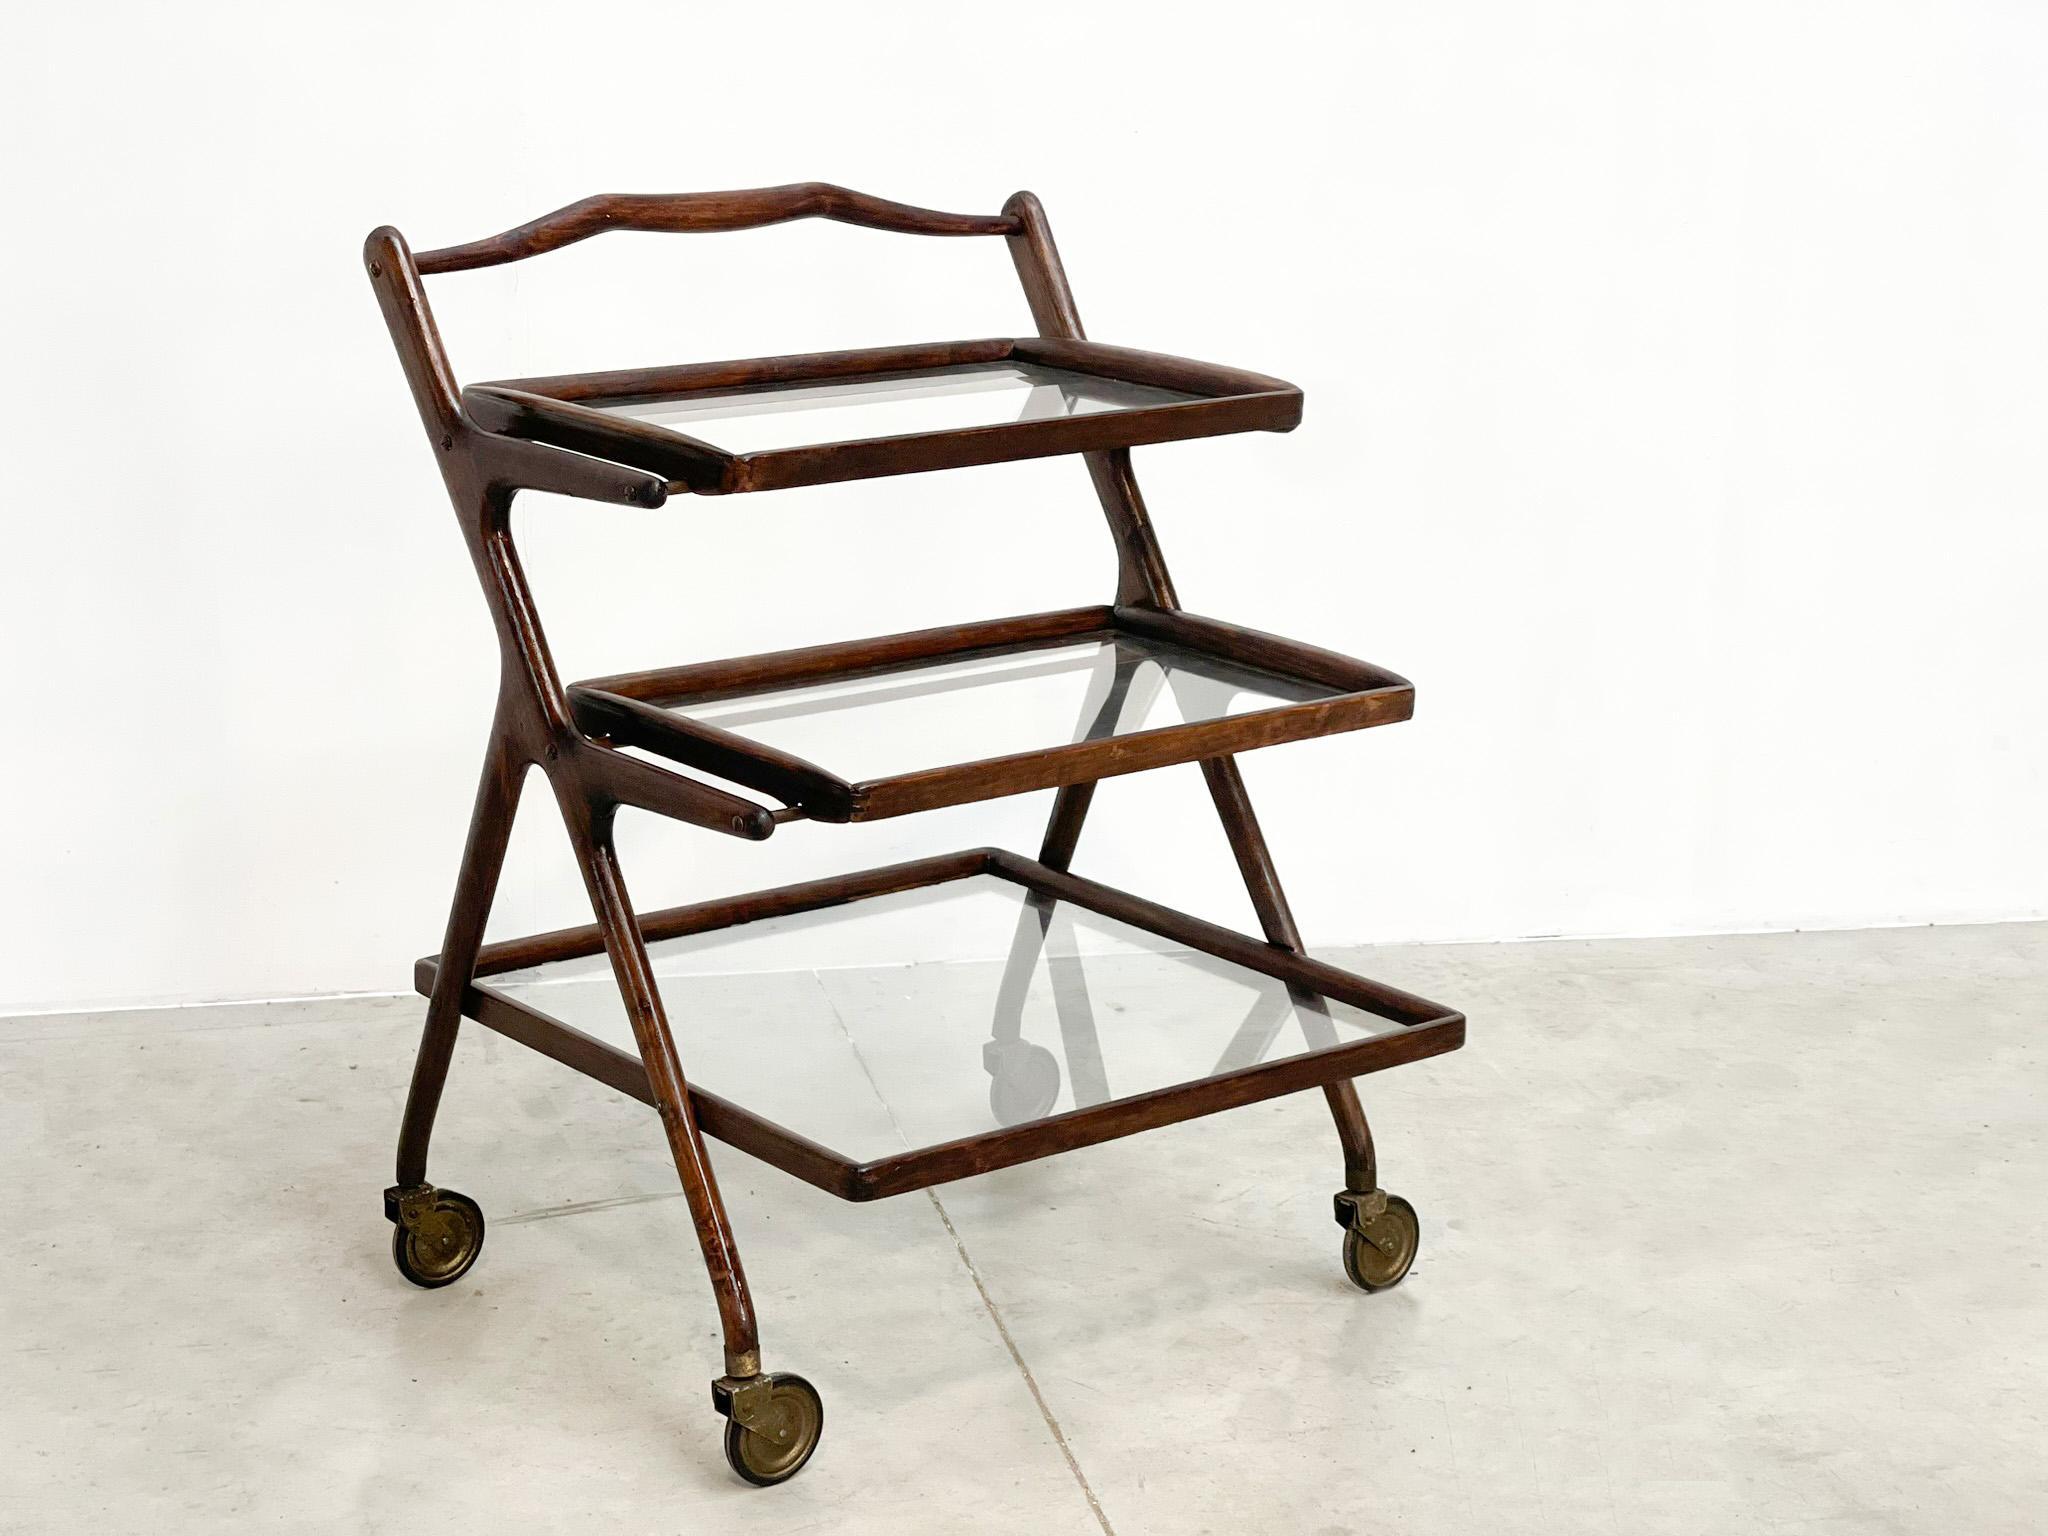 very nice and versitile bar trolley by the famous italian designer Casare Lacca.
He designed this in the 50s for Cassina. It has 3 trays, the 2 upper ones are removable. 
It has a ebonized walnut frame with brass accents. 

 

Perfect to put